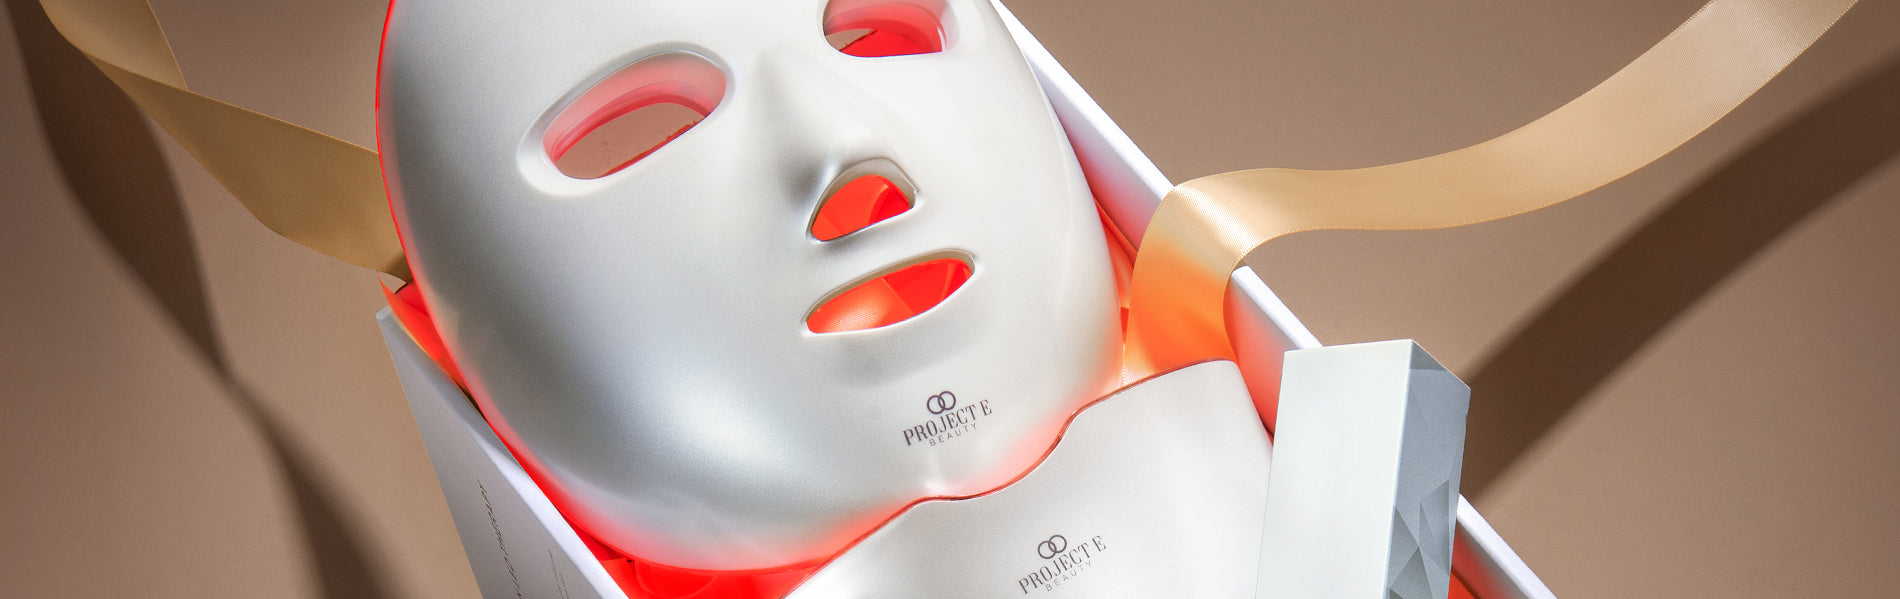 Product review of Project E Beauty Photon Skin Rejuvenation Face & Neck Mask